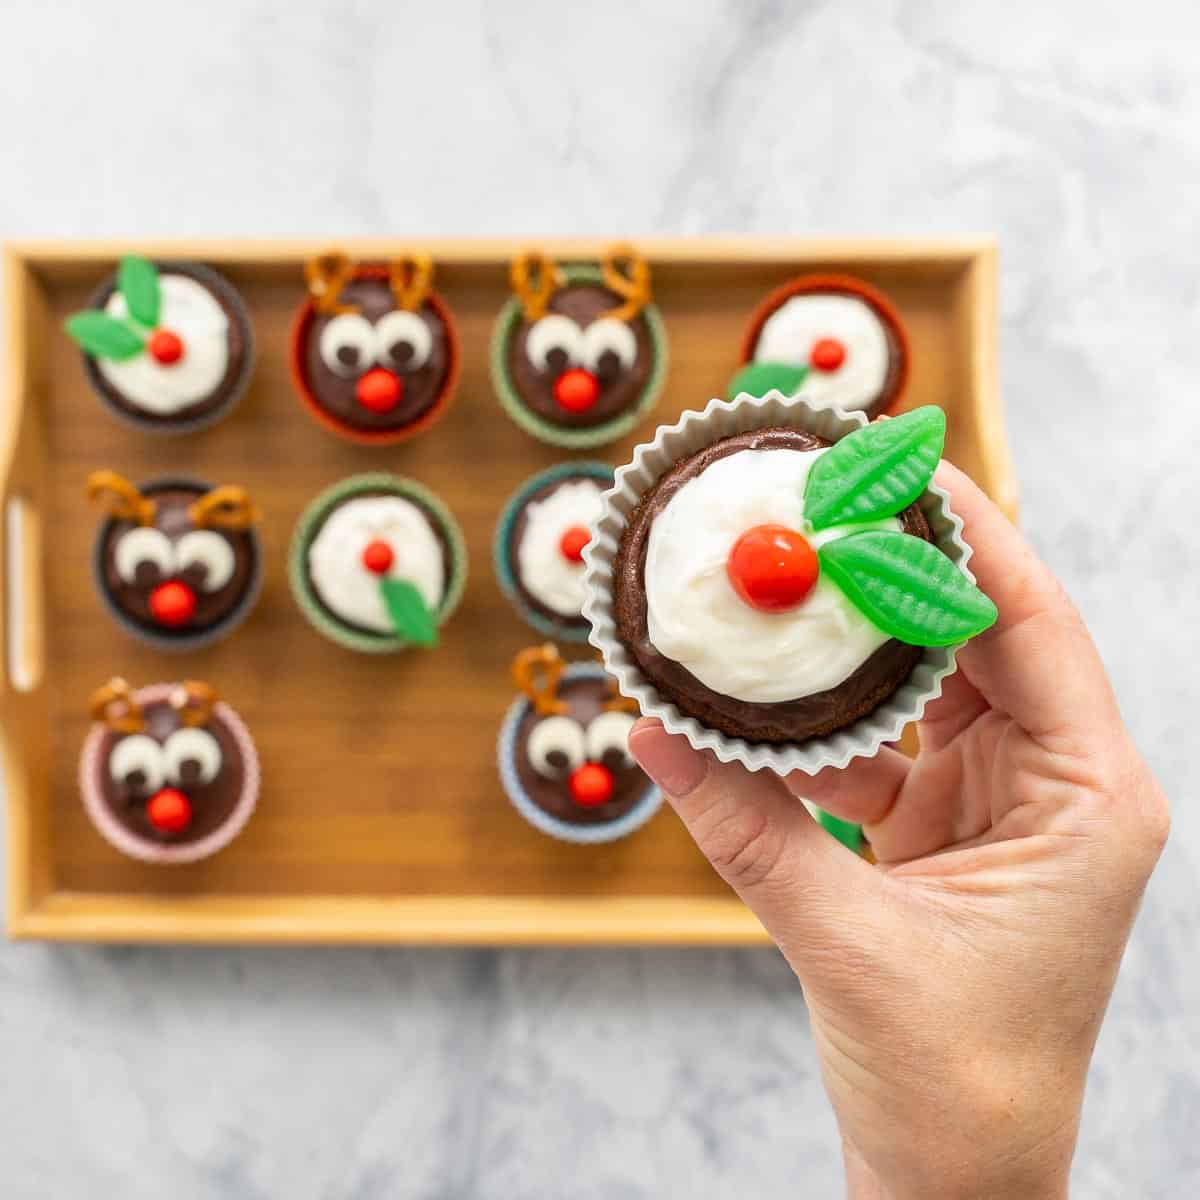 A cupcake decorated to look like a figgy pudding with frosting and candy being held up to the camera above a tray of cupcakes decorated to look like reindeer. 